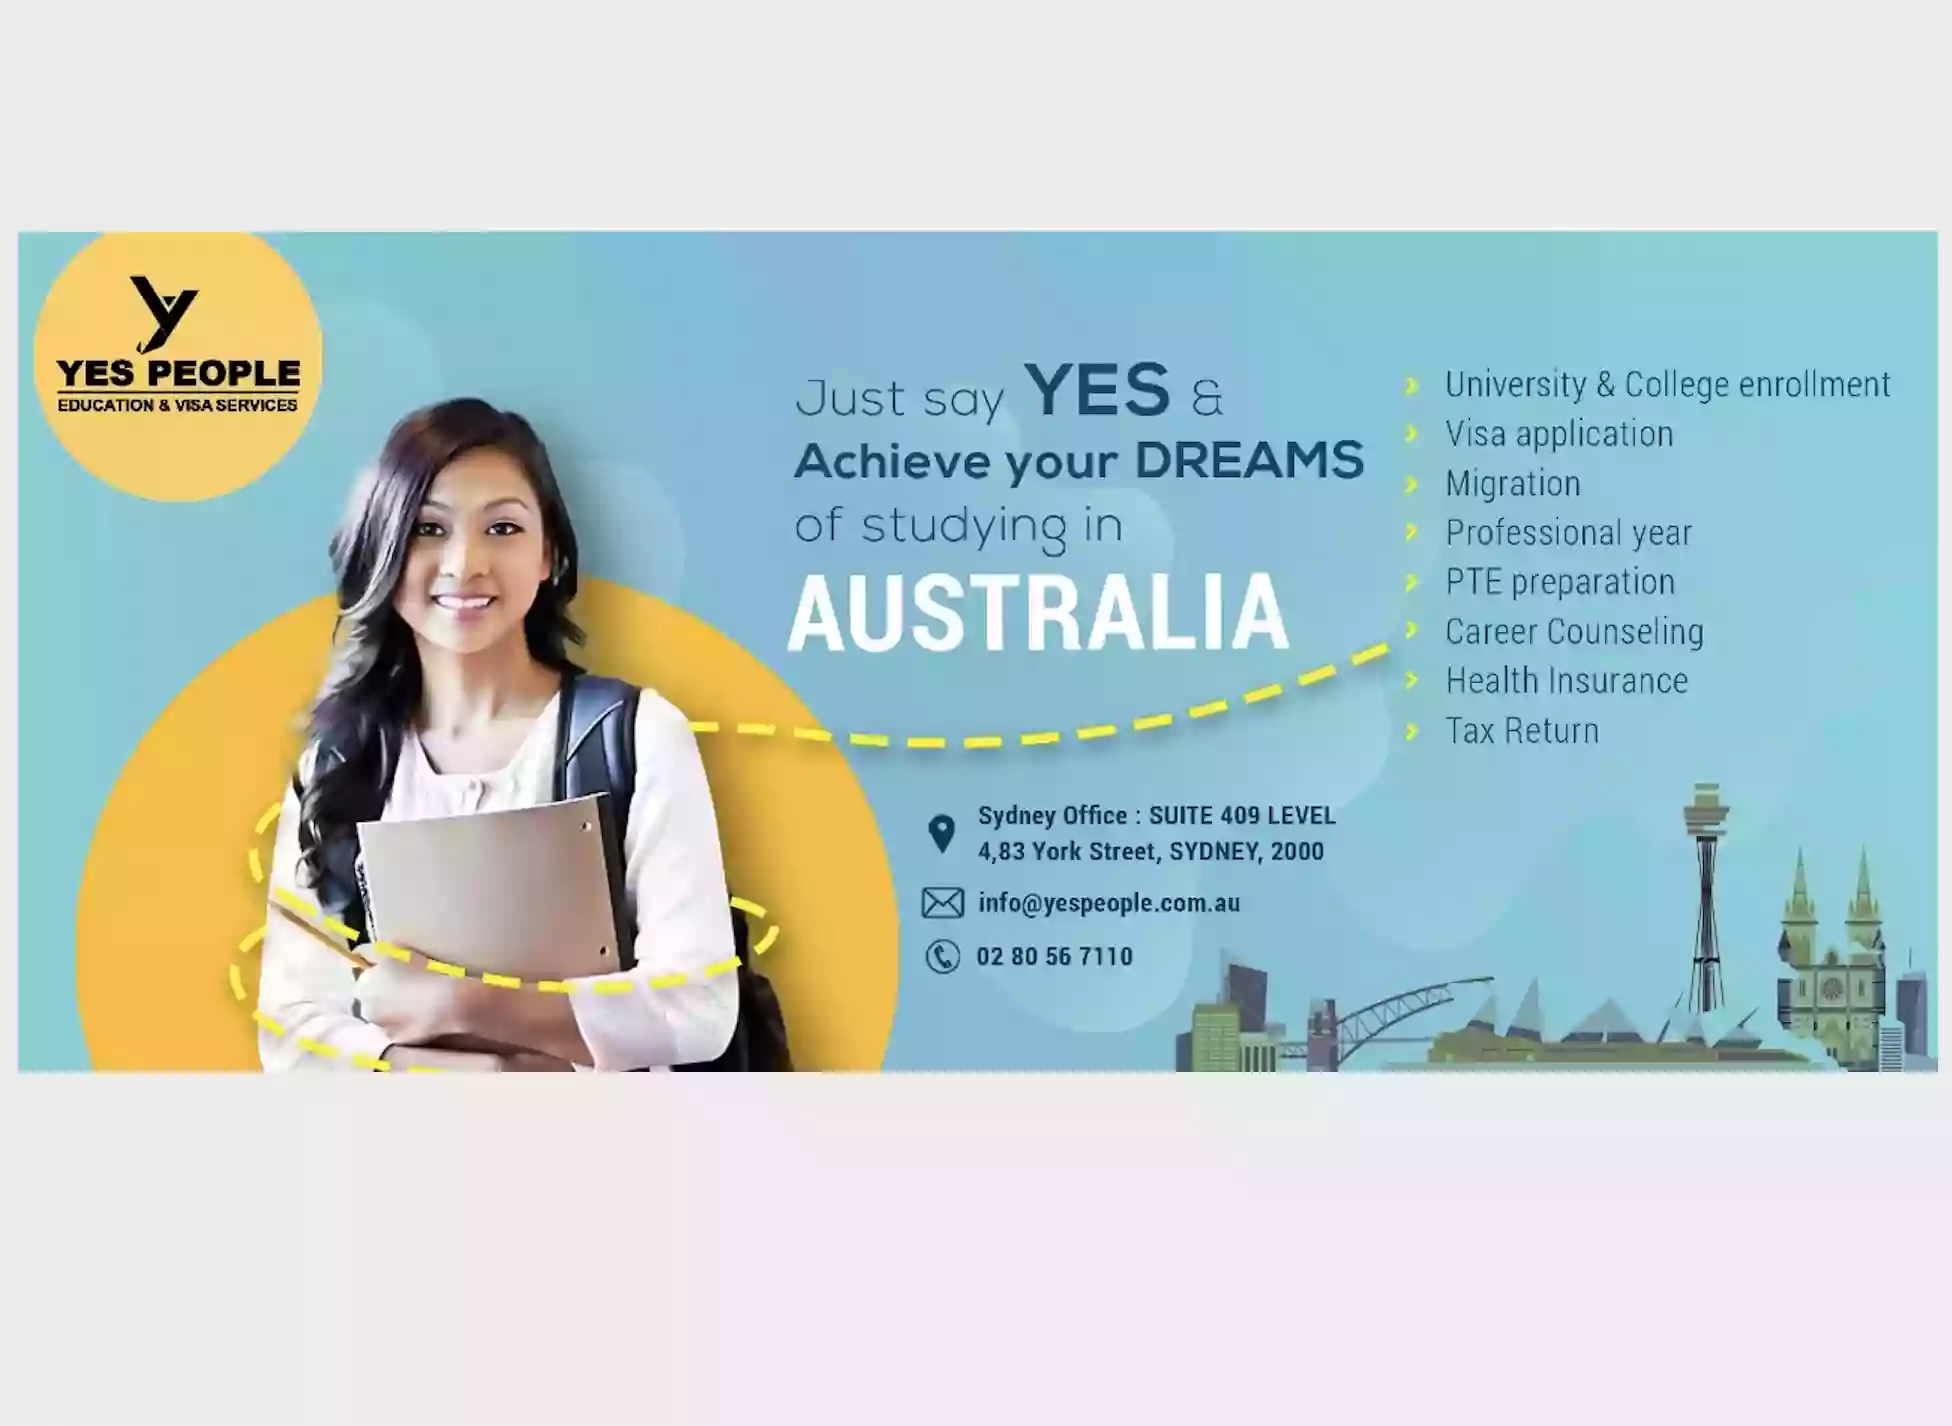 Yes People Education & Visa Services